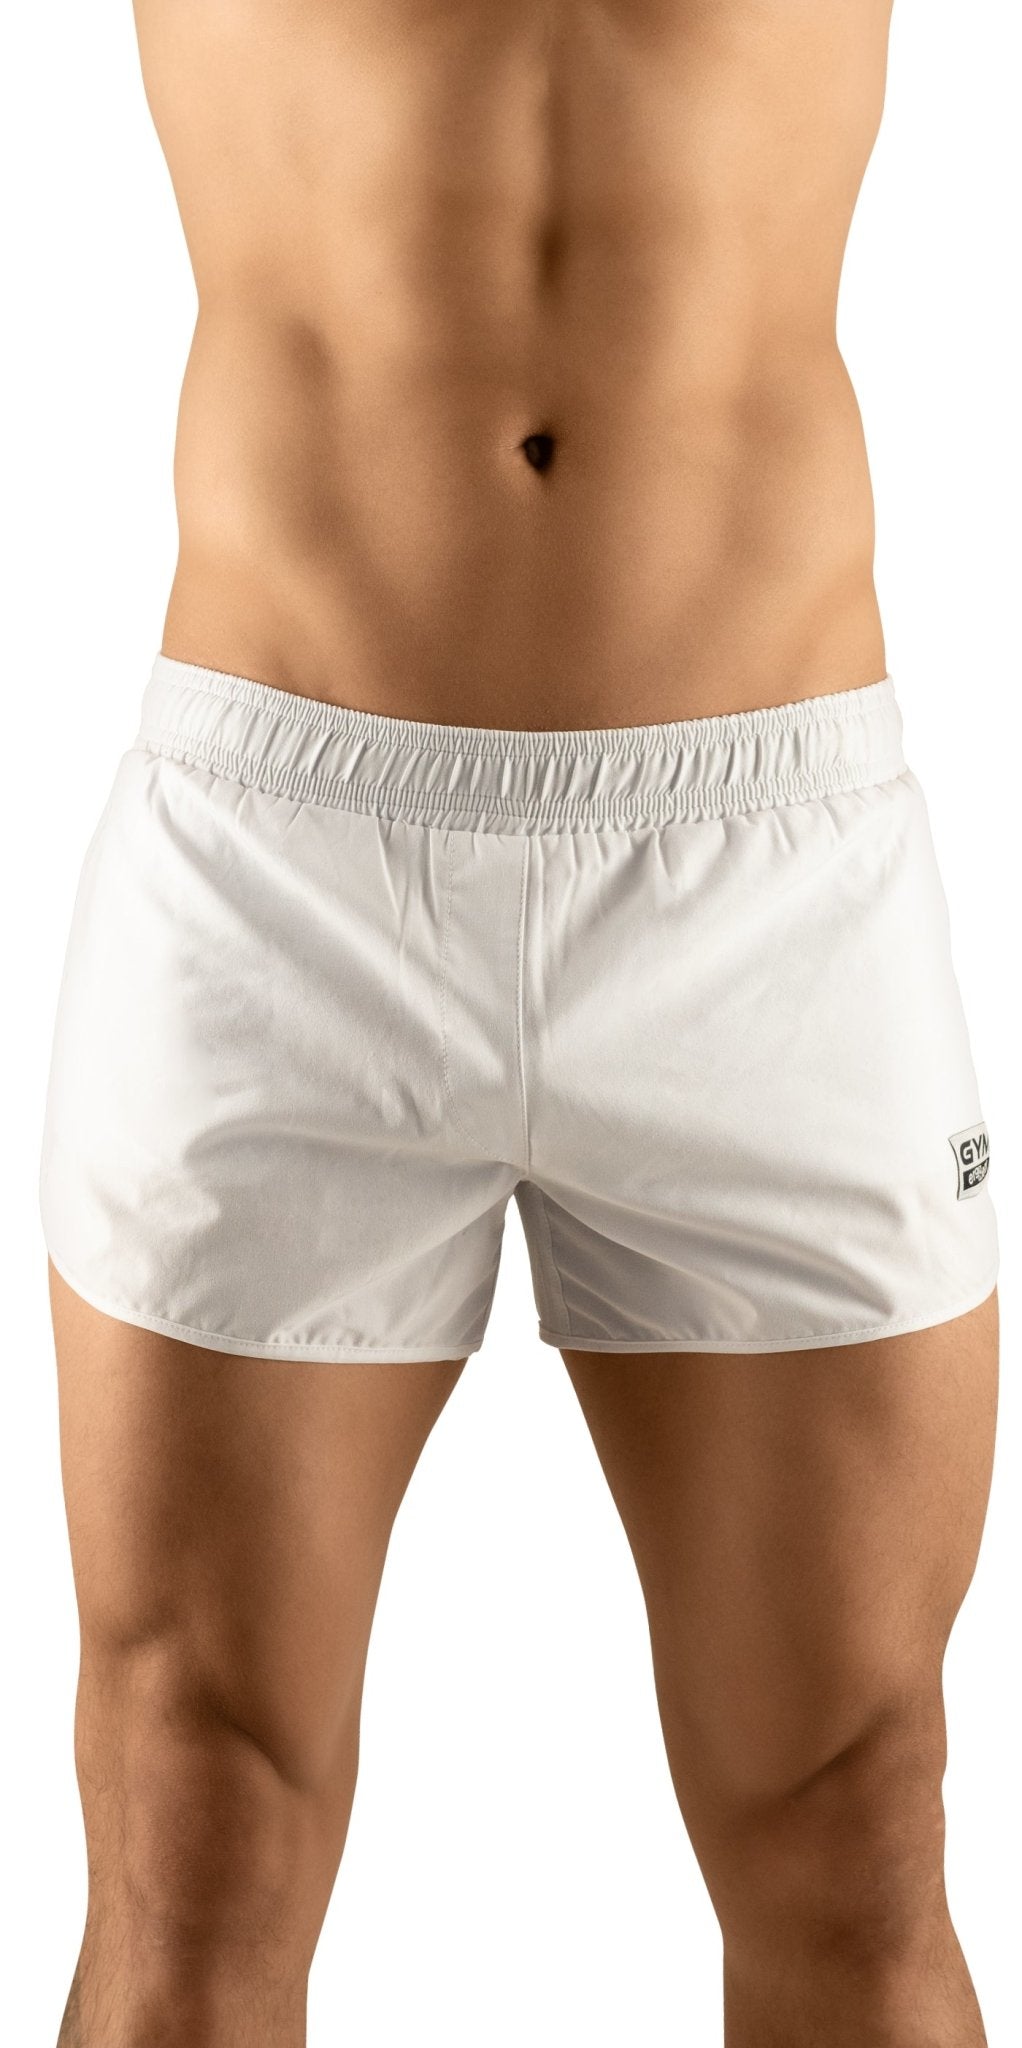 Ergowear White Gym Shorts With Built In Thong - Johnny Beach